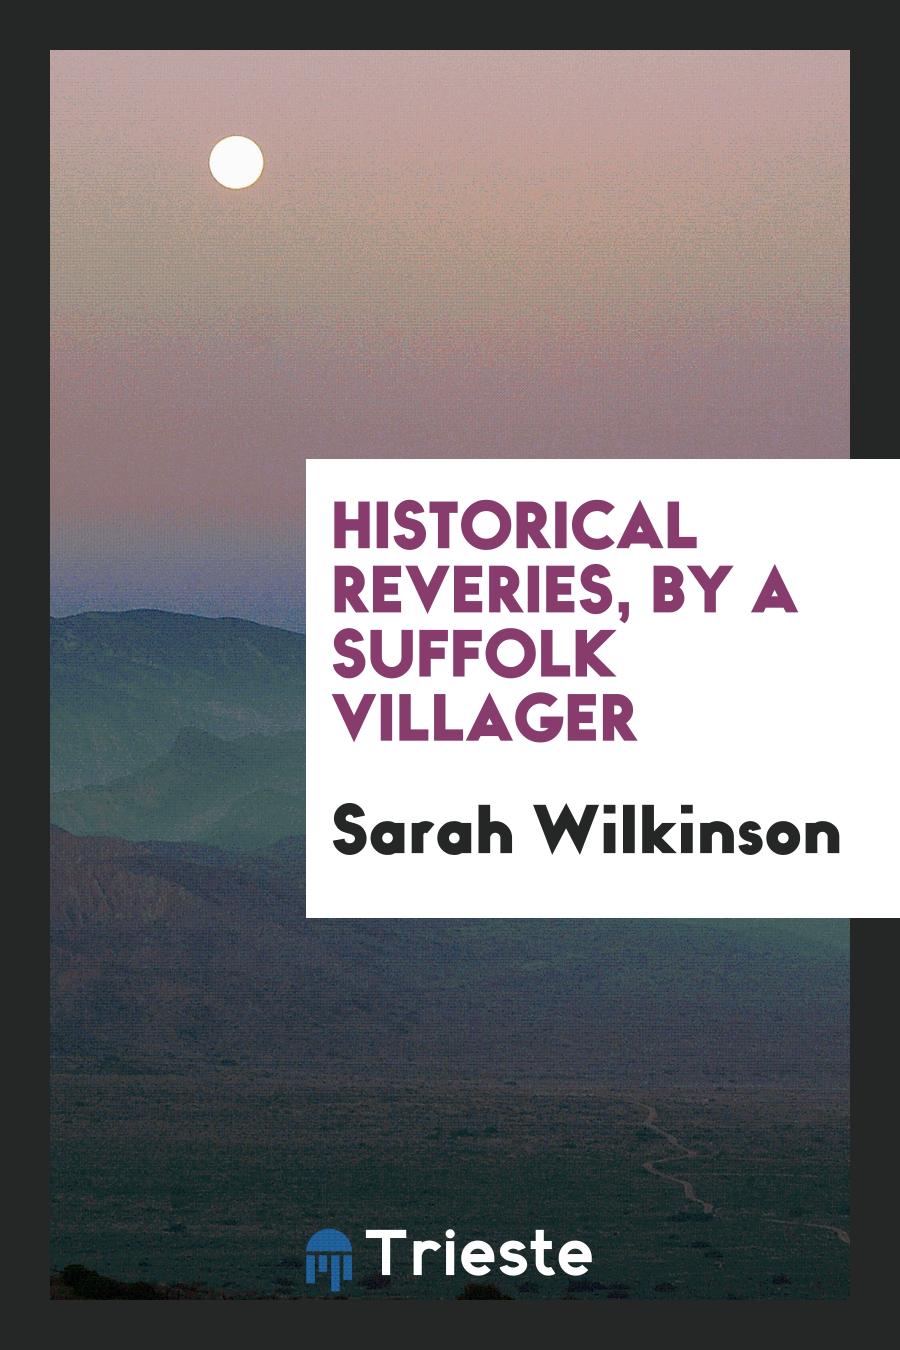 Historical Reveries, by a Suffolk Villager